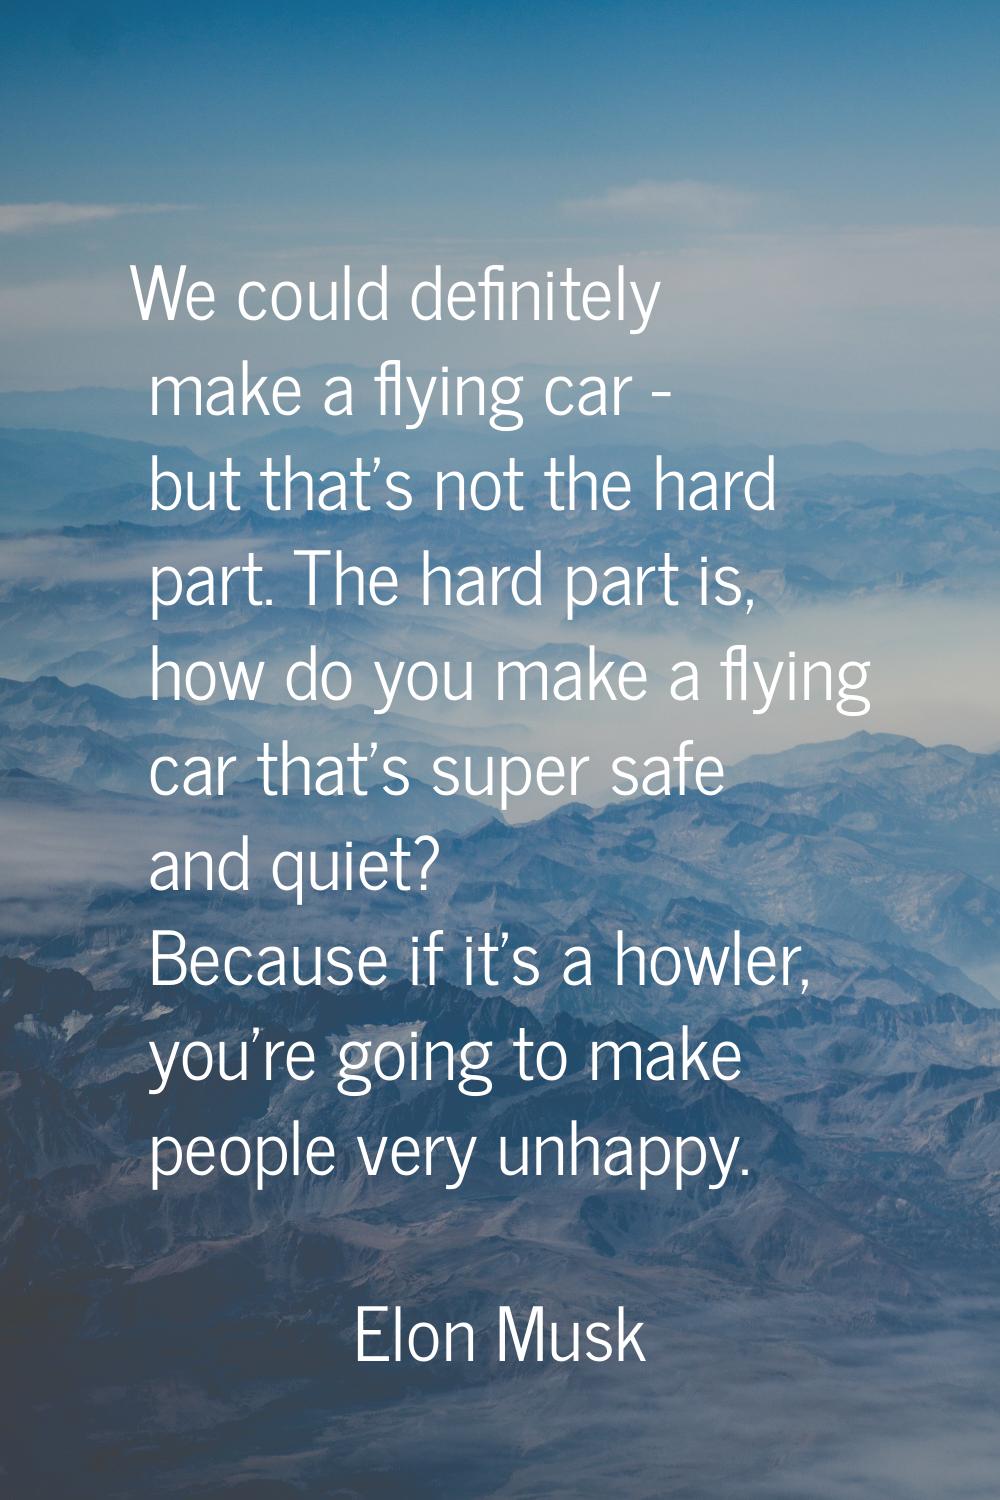 We could definitely make a flying car - but that's not the hard part. The hard part is, how do you 